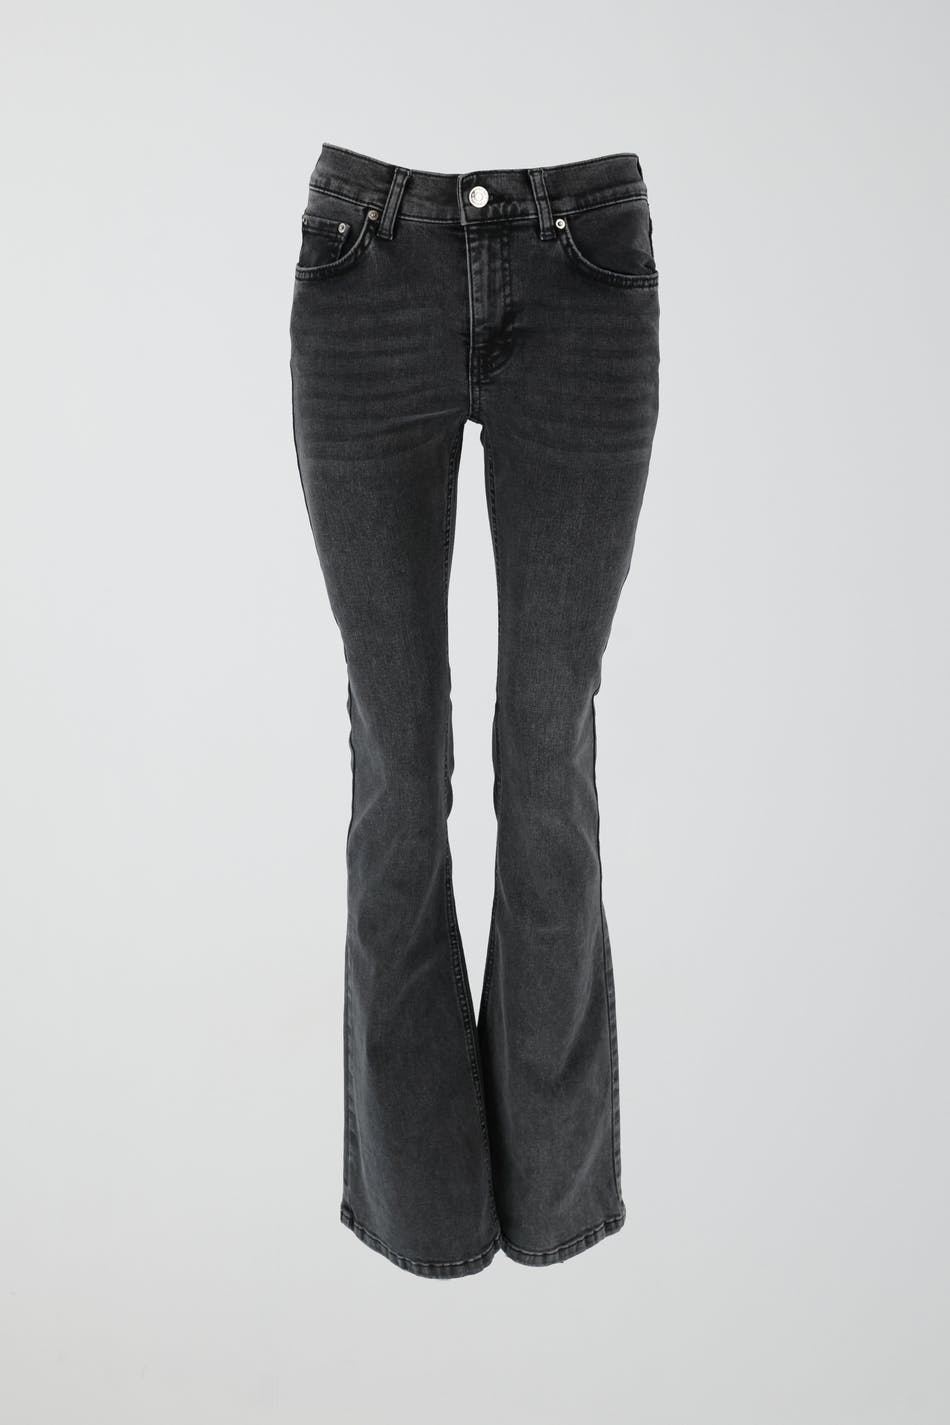 Gina Tricot - Low waist tall bootcut jeans - flare & wide jeans - Grey - 32 - Female